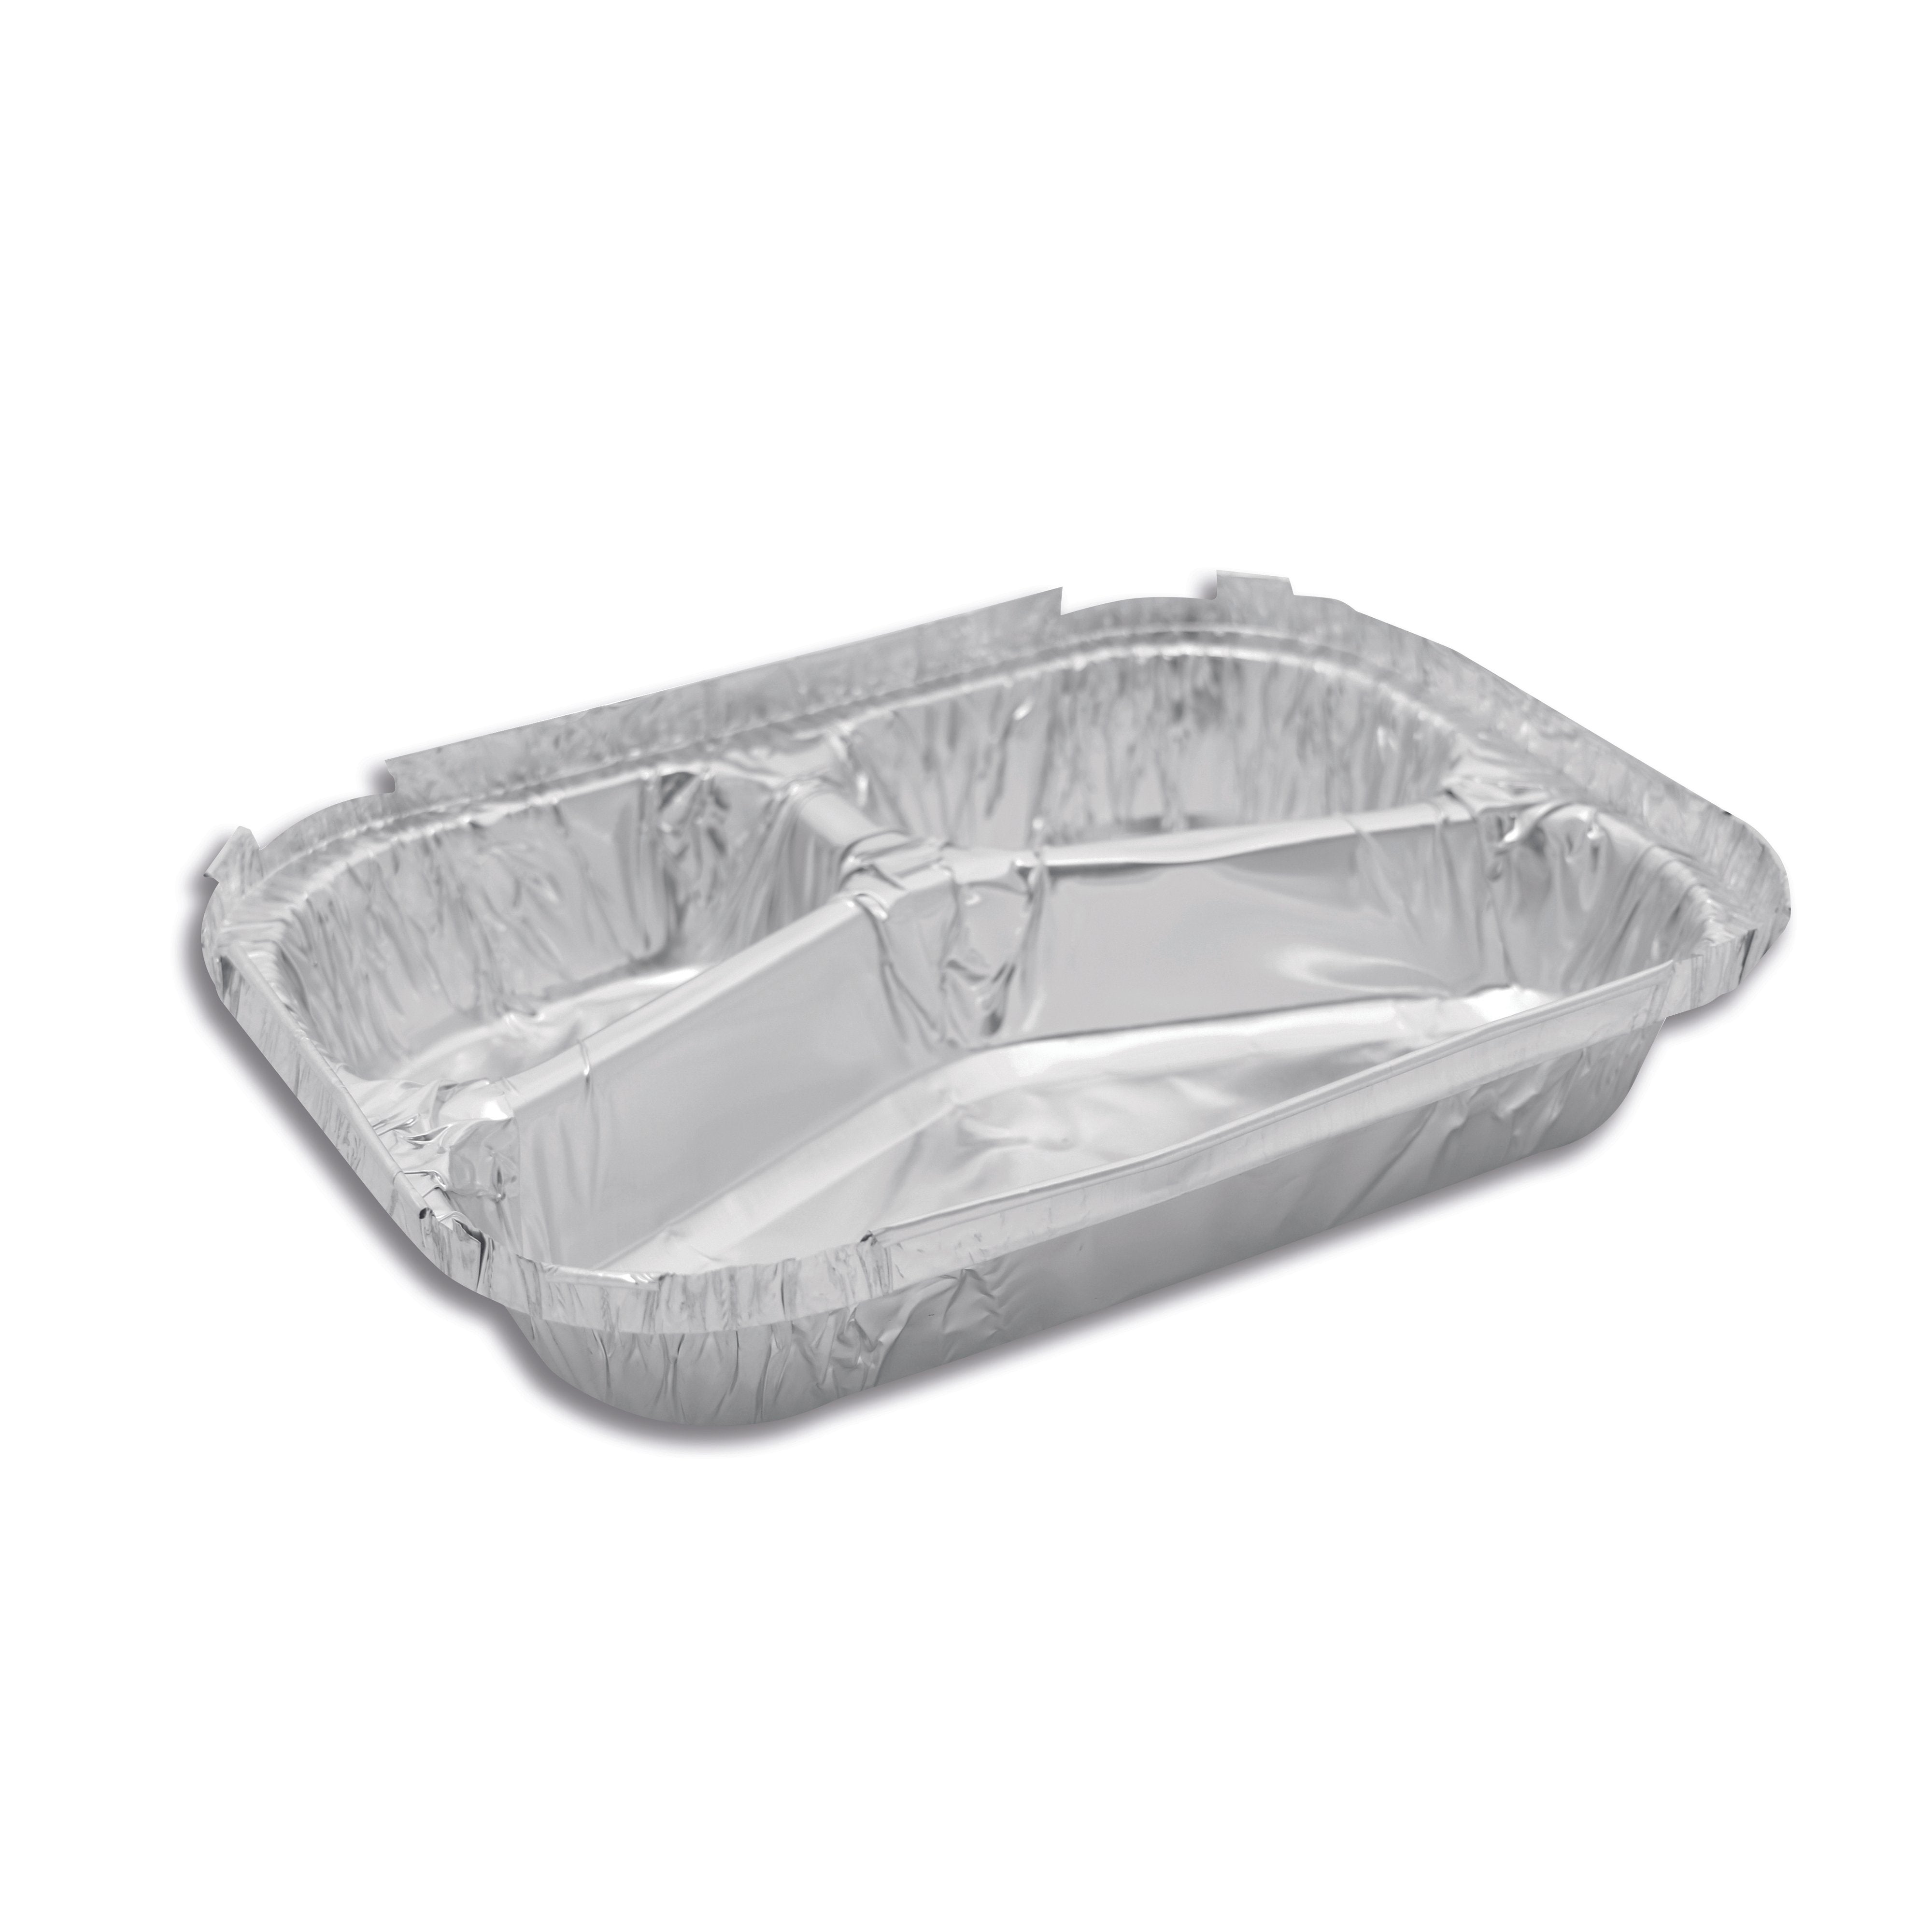 Katermaster Katermaster Tray Meal 3 compartment Foil Dining & Takeaway  